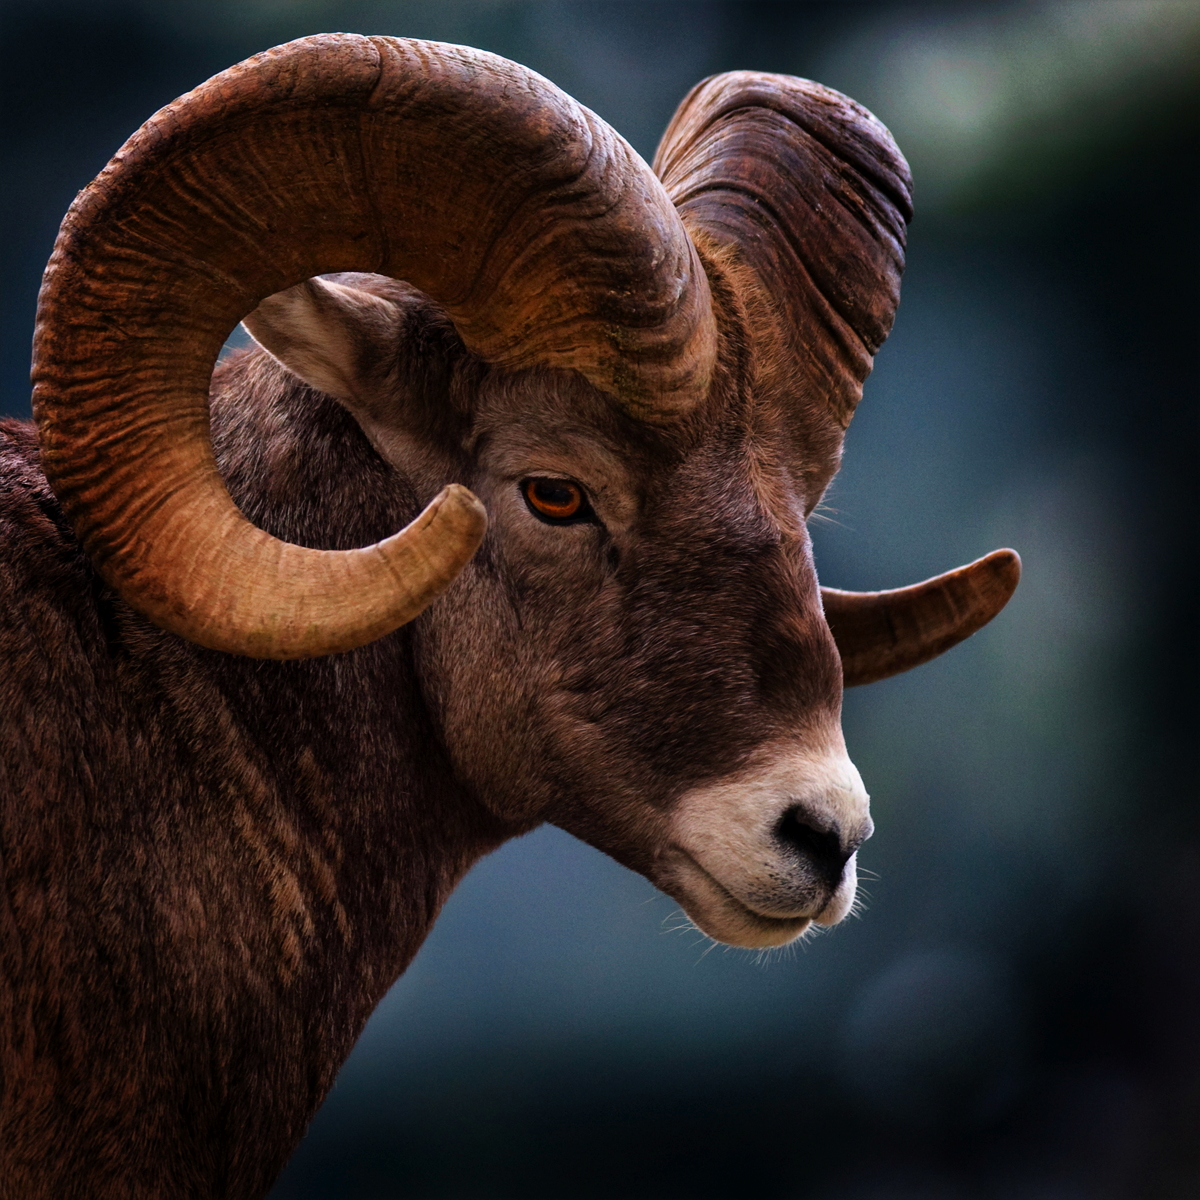 Big Horn Sheep from Wiki Commons